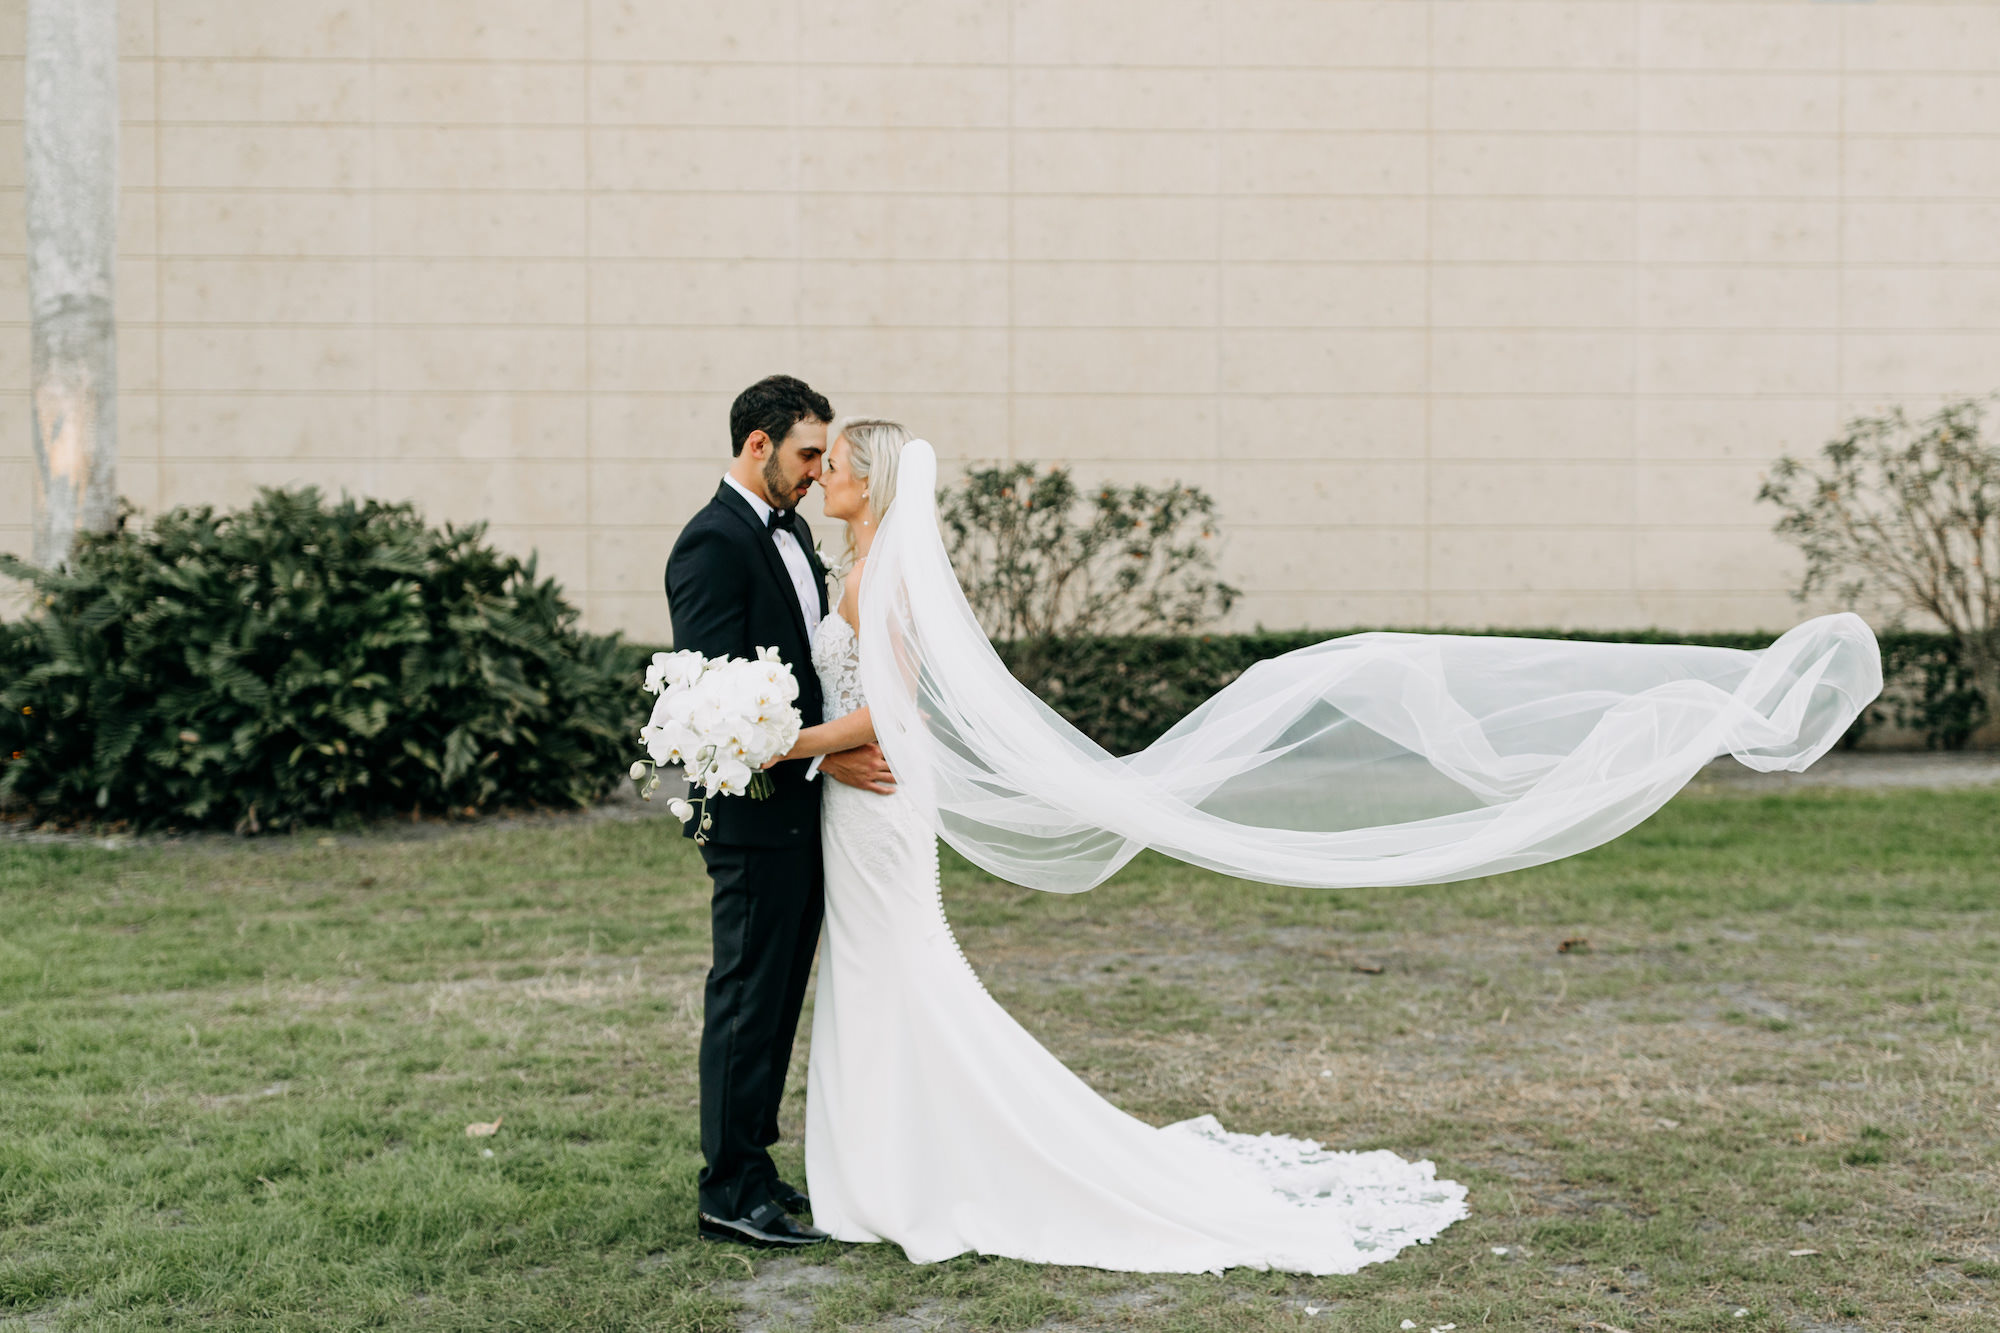 Intimate Bride and Groom Wedding Portrait | Tampa Bay Photographer Amber McWhorter Photography | Planner Wilder Mind Events | Videographer J&S Media